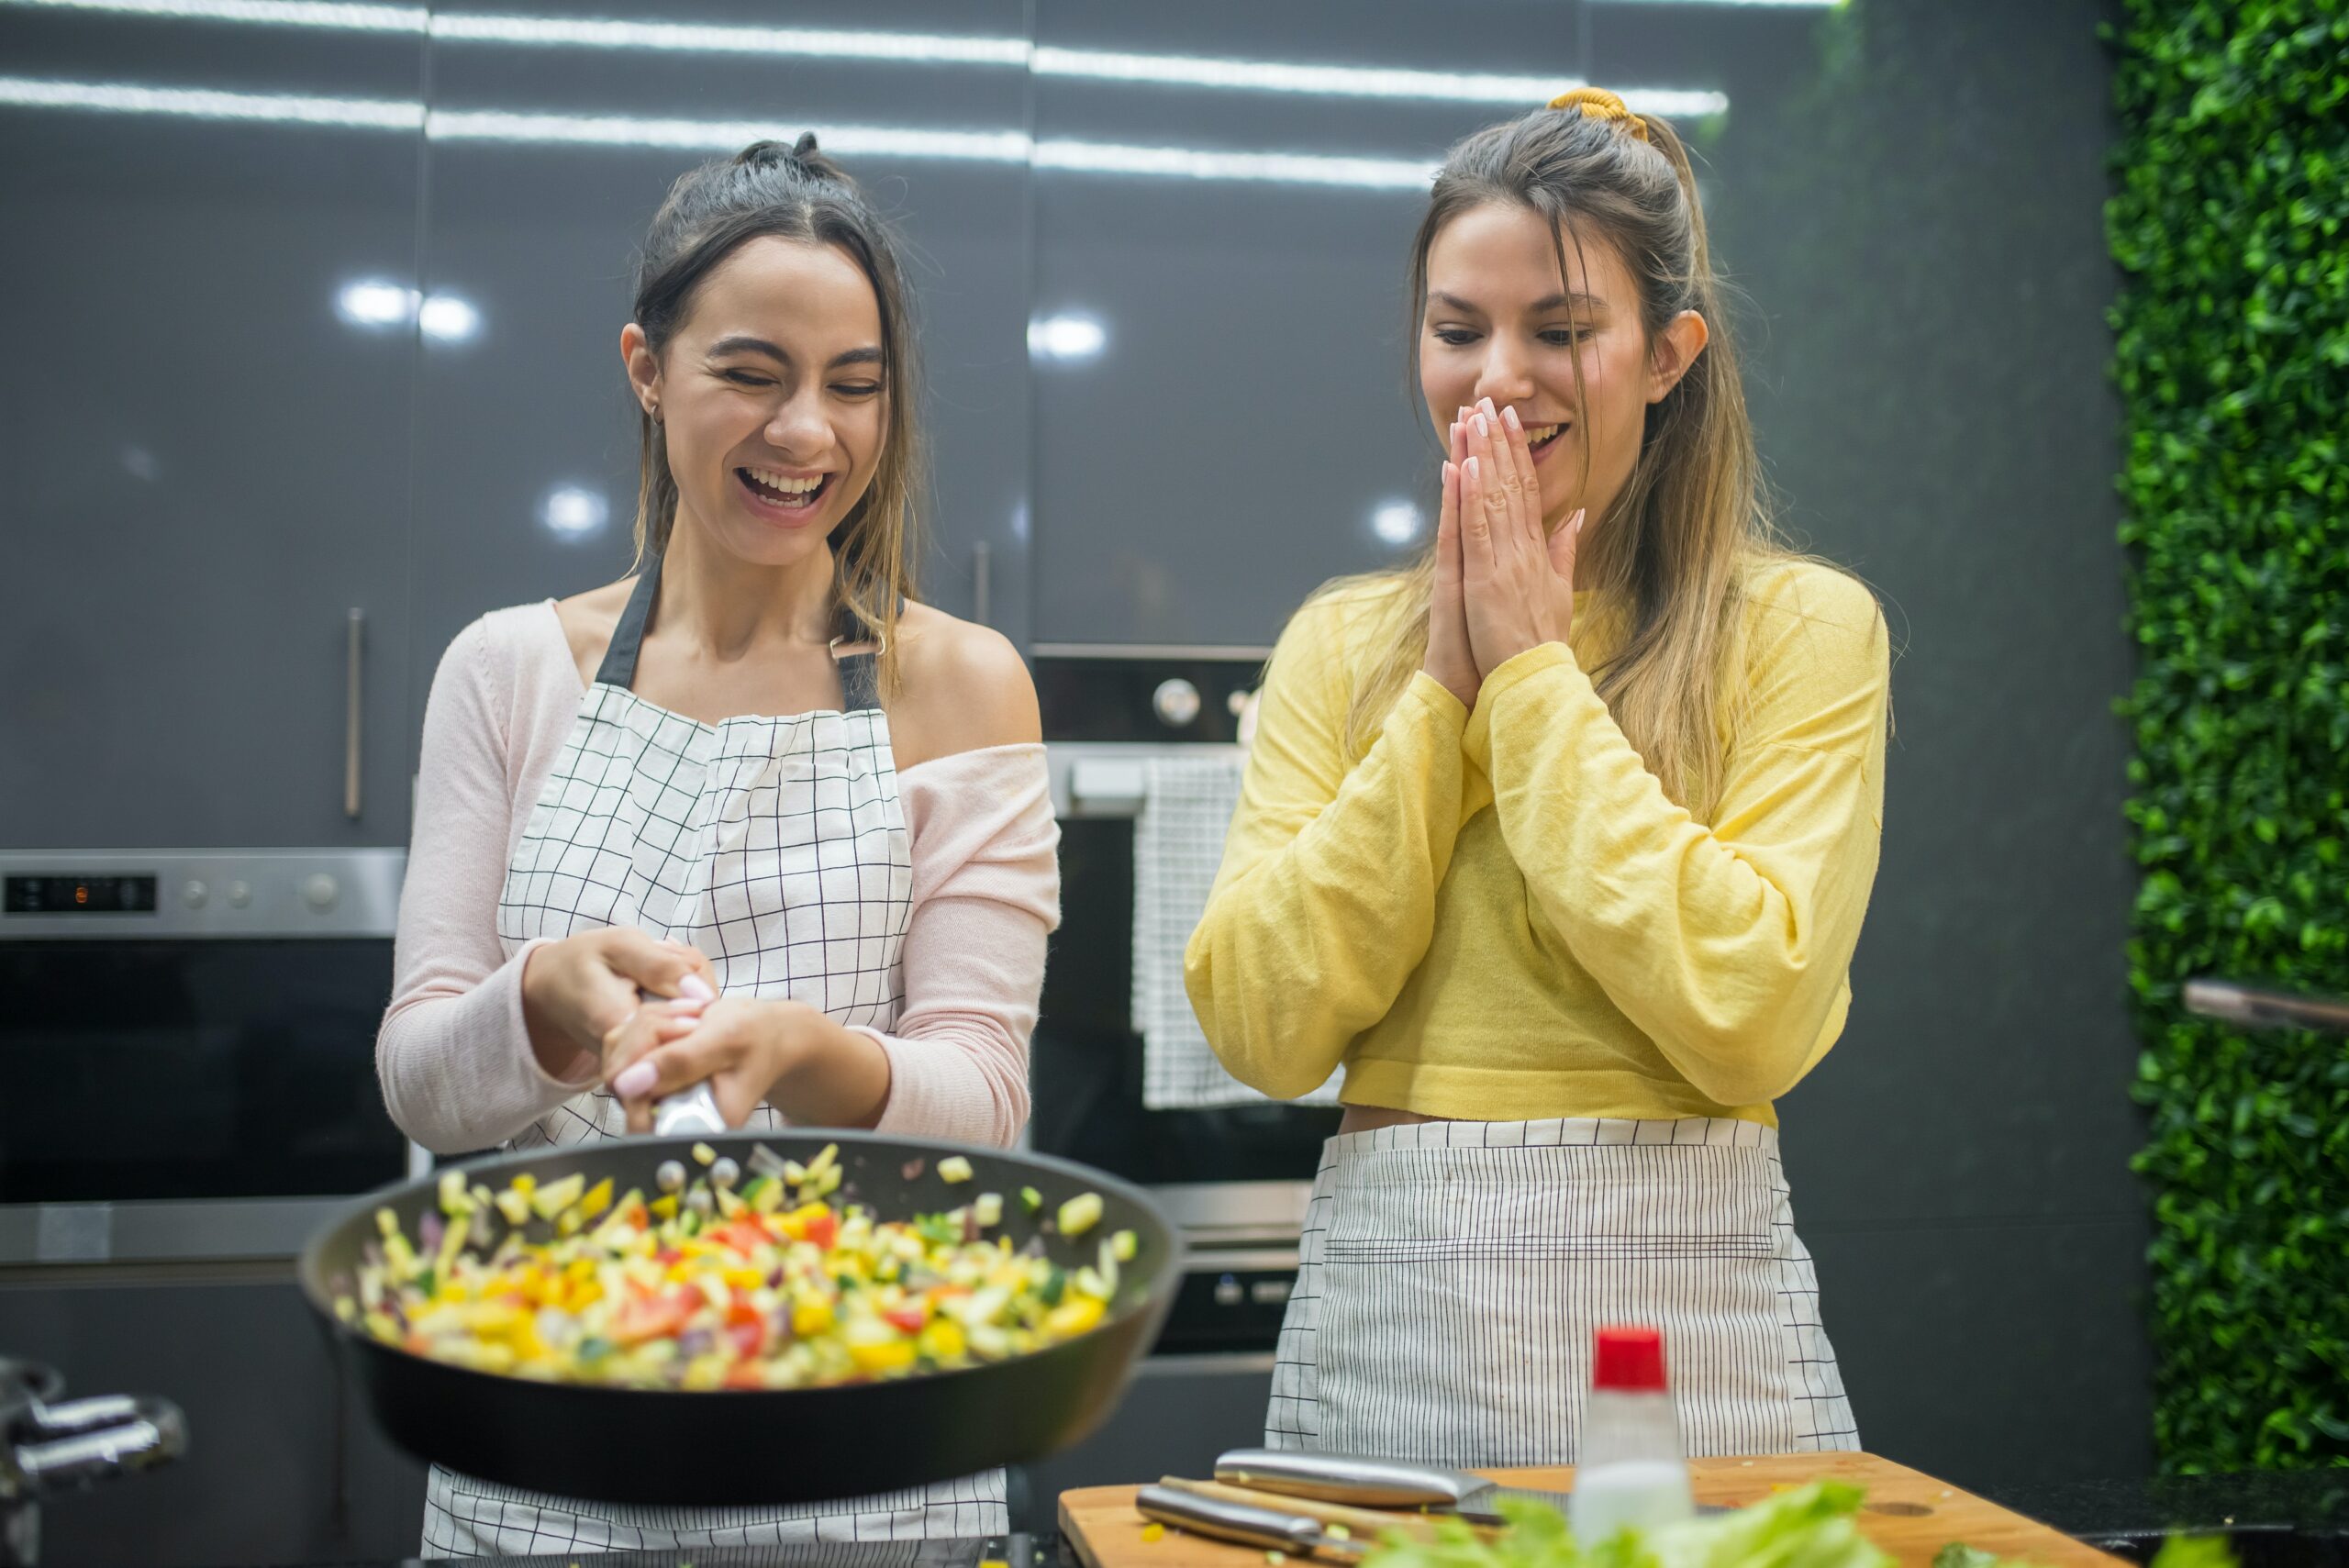 Cooking keto together can scrub trauma, depression, and anxiety away.